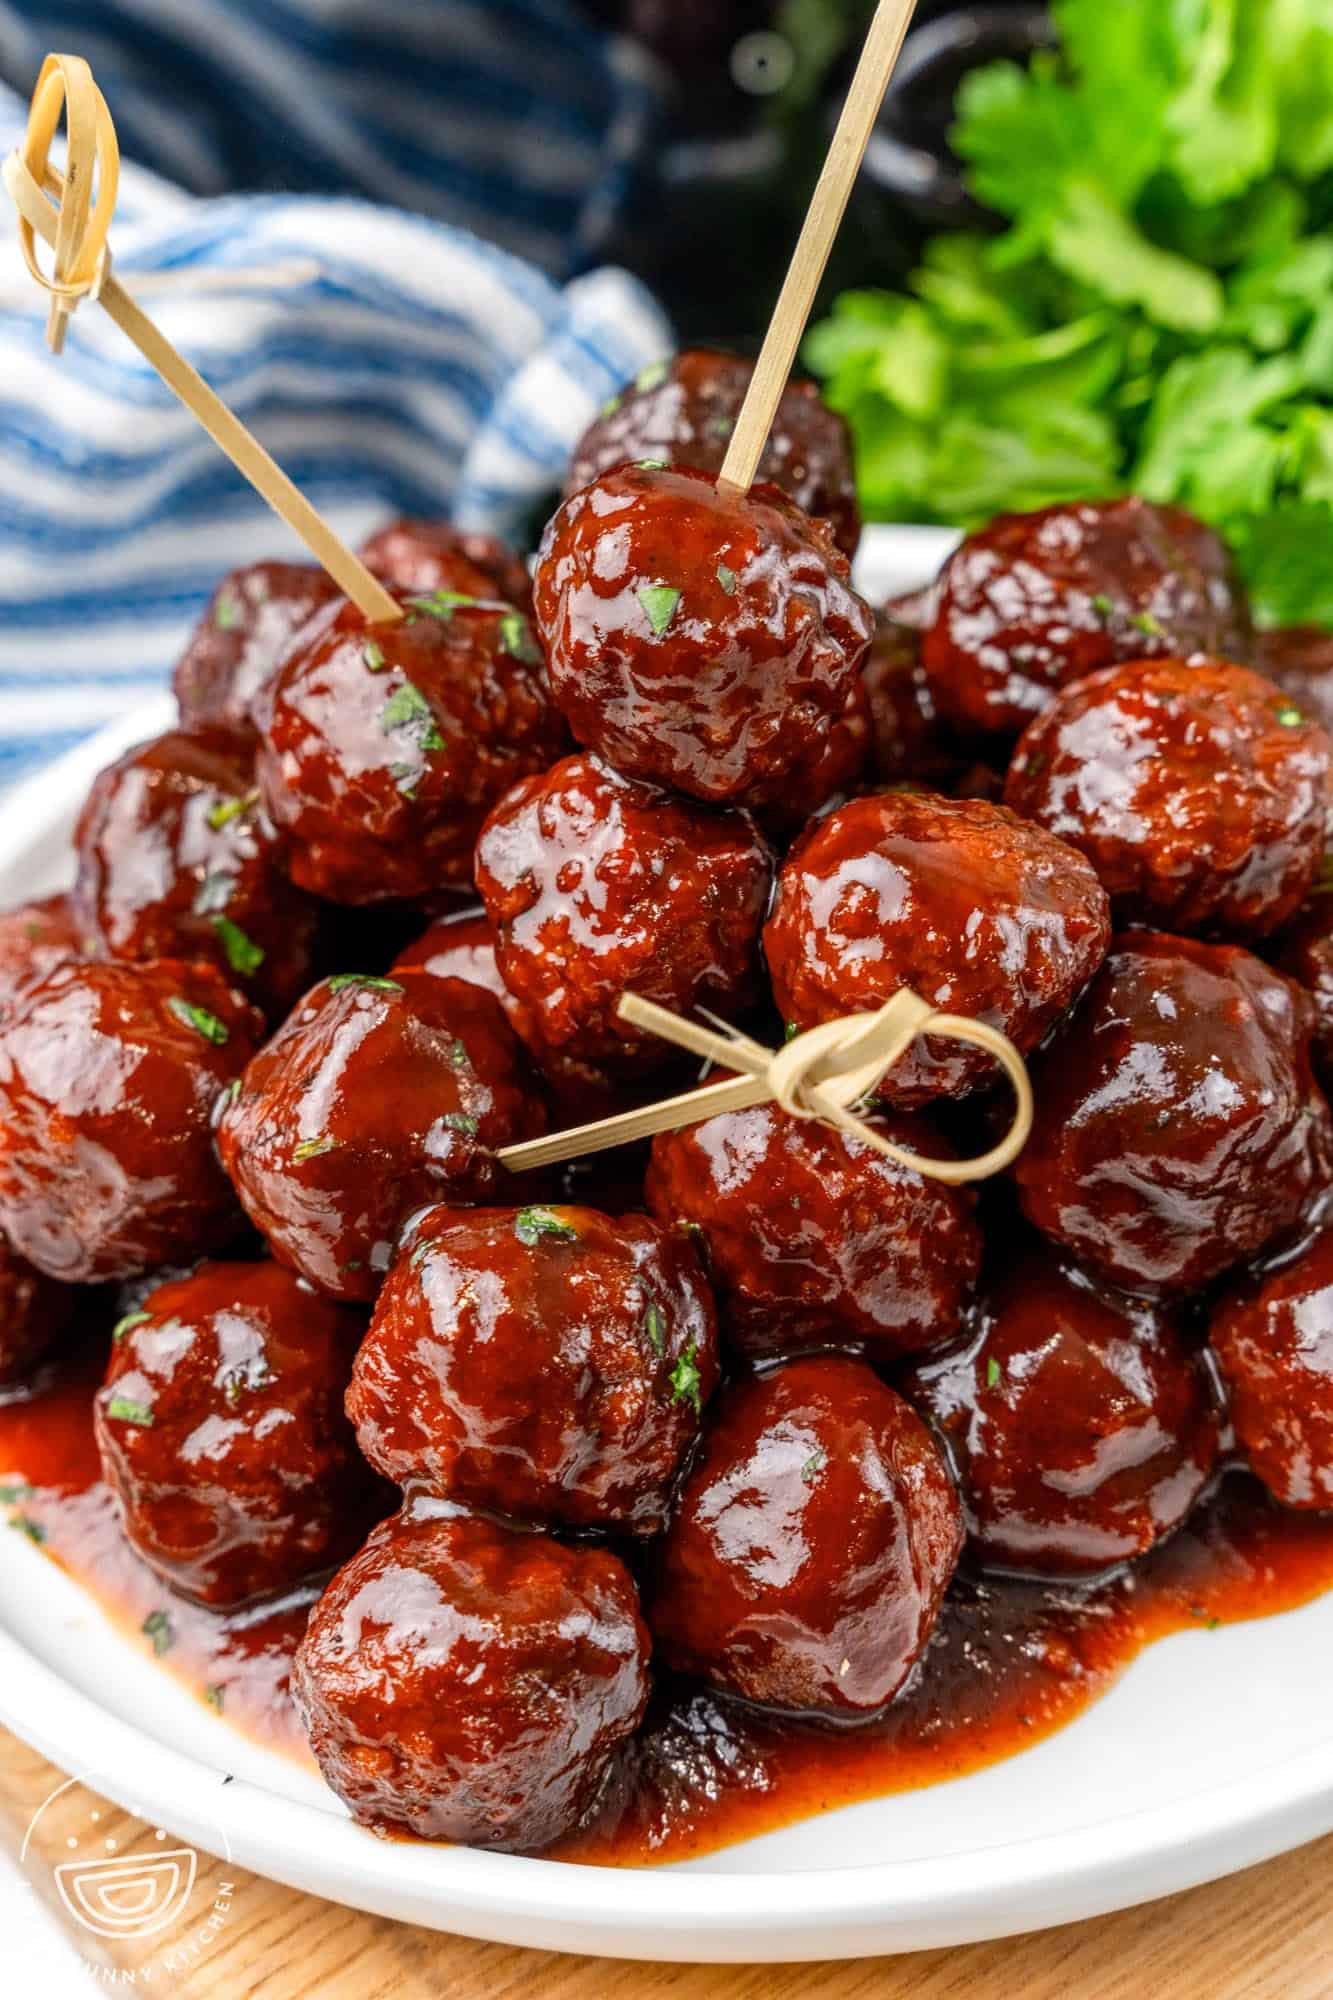 Grapejelly meatballs served on a plate as an appetizer